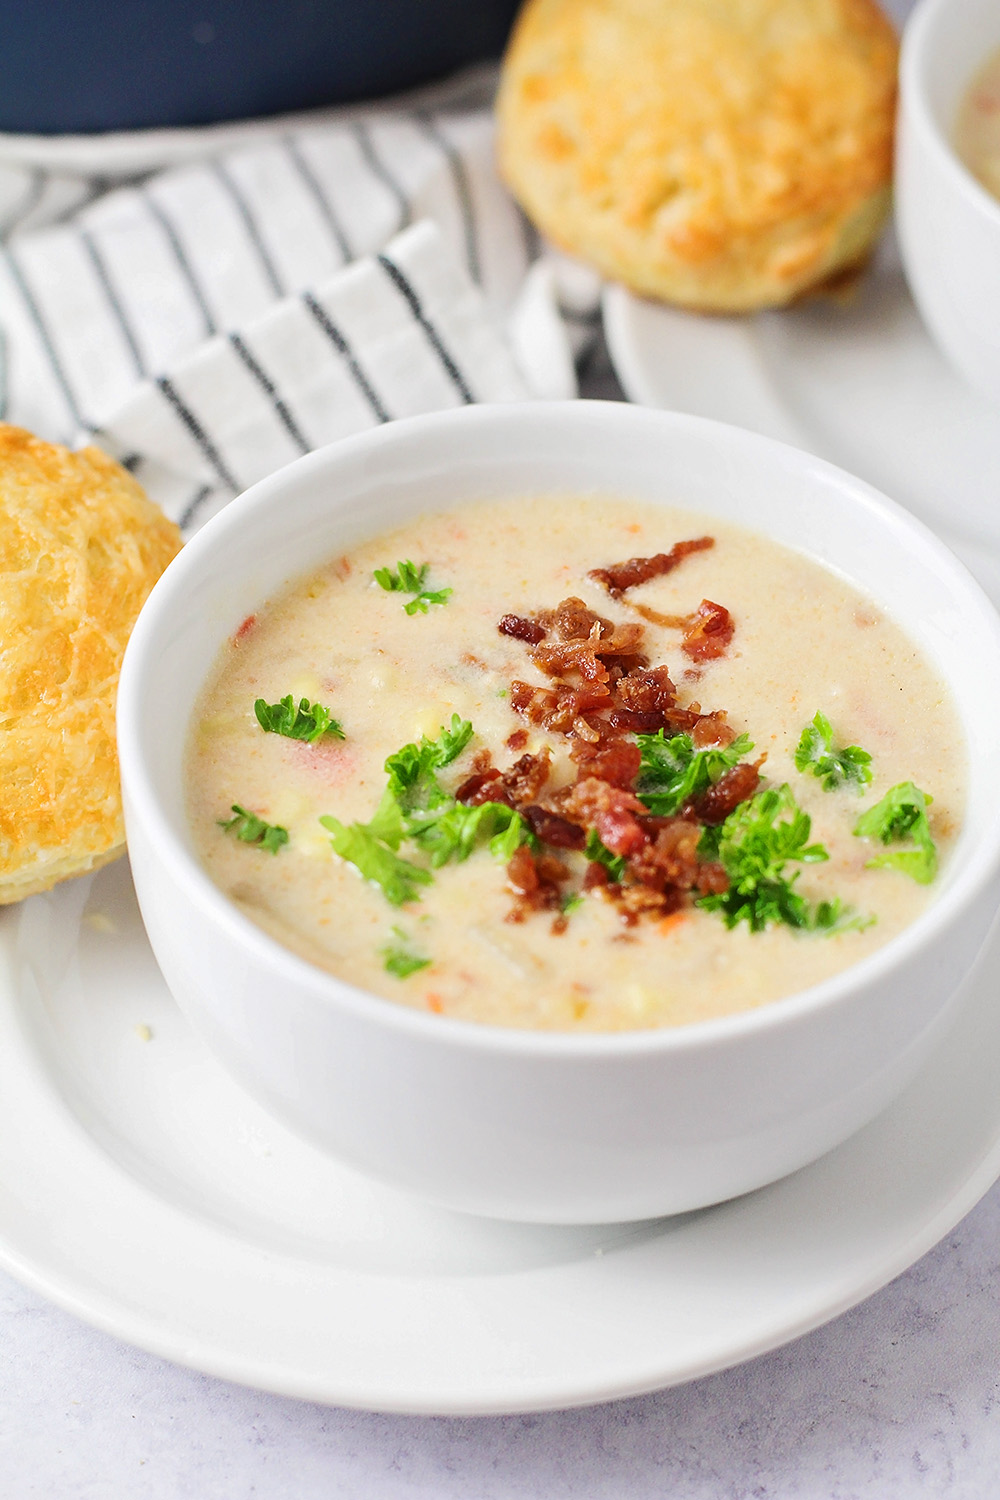 This Instant Pot summer corn chowder is a great way to enjoy a tasty soup without heating up the whole house! It's simple to make and so delicious!